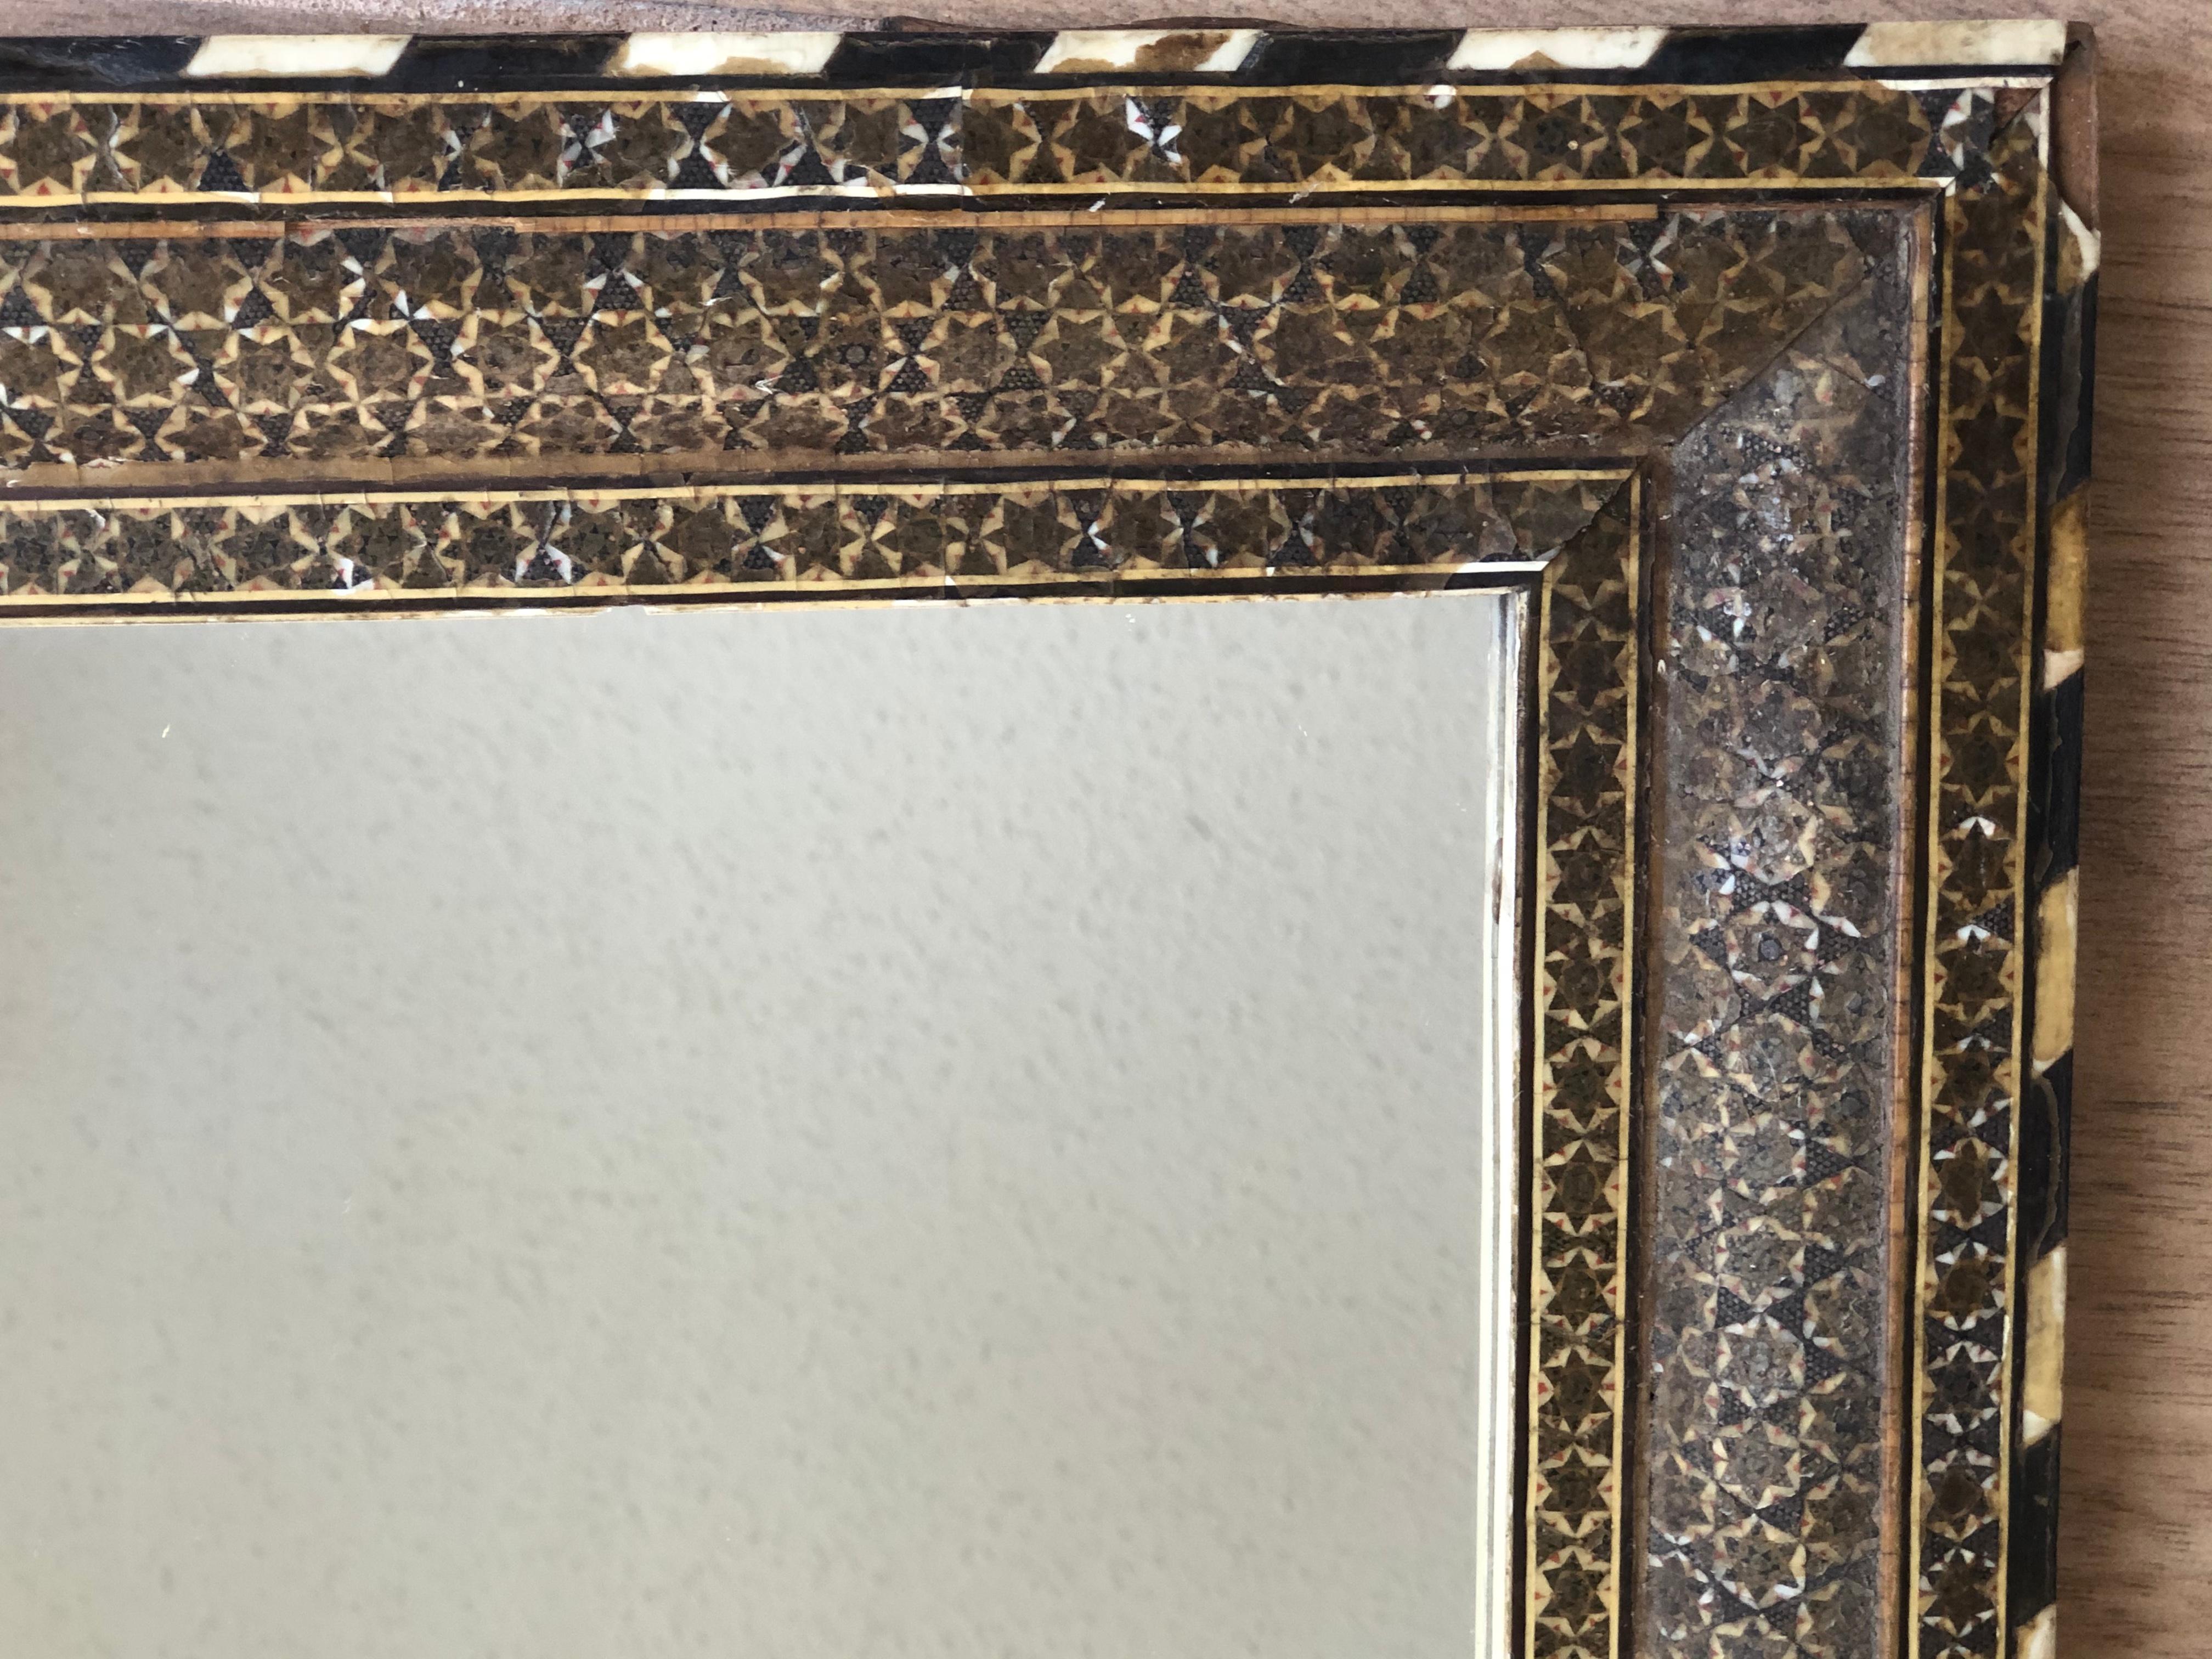 This beautiful one of a kind Rustin middle eastern mirror is inlaid with mother of pearl and bone inlay on a rectangular shaped wooden frame. Colors of dark browns to light. 

Mirror is as is and has a few chips from natural wear and tear pictured